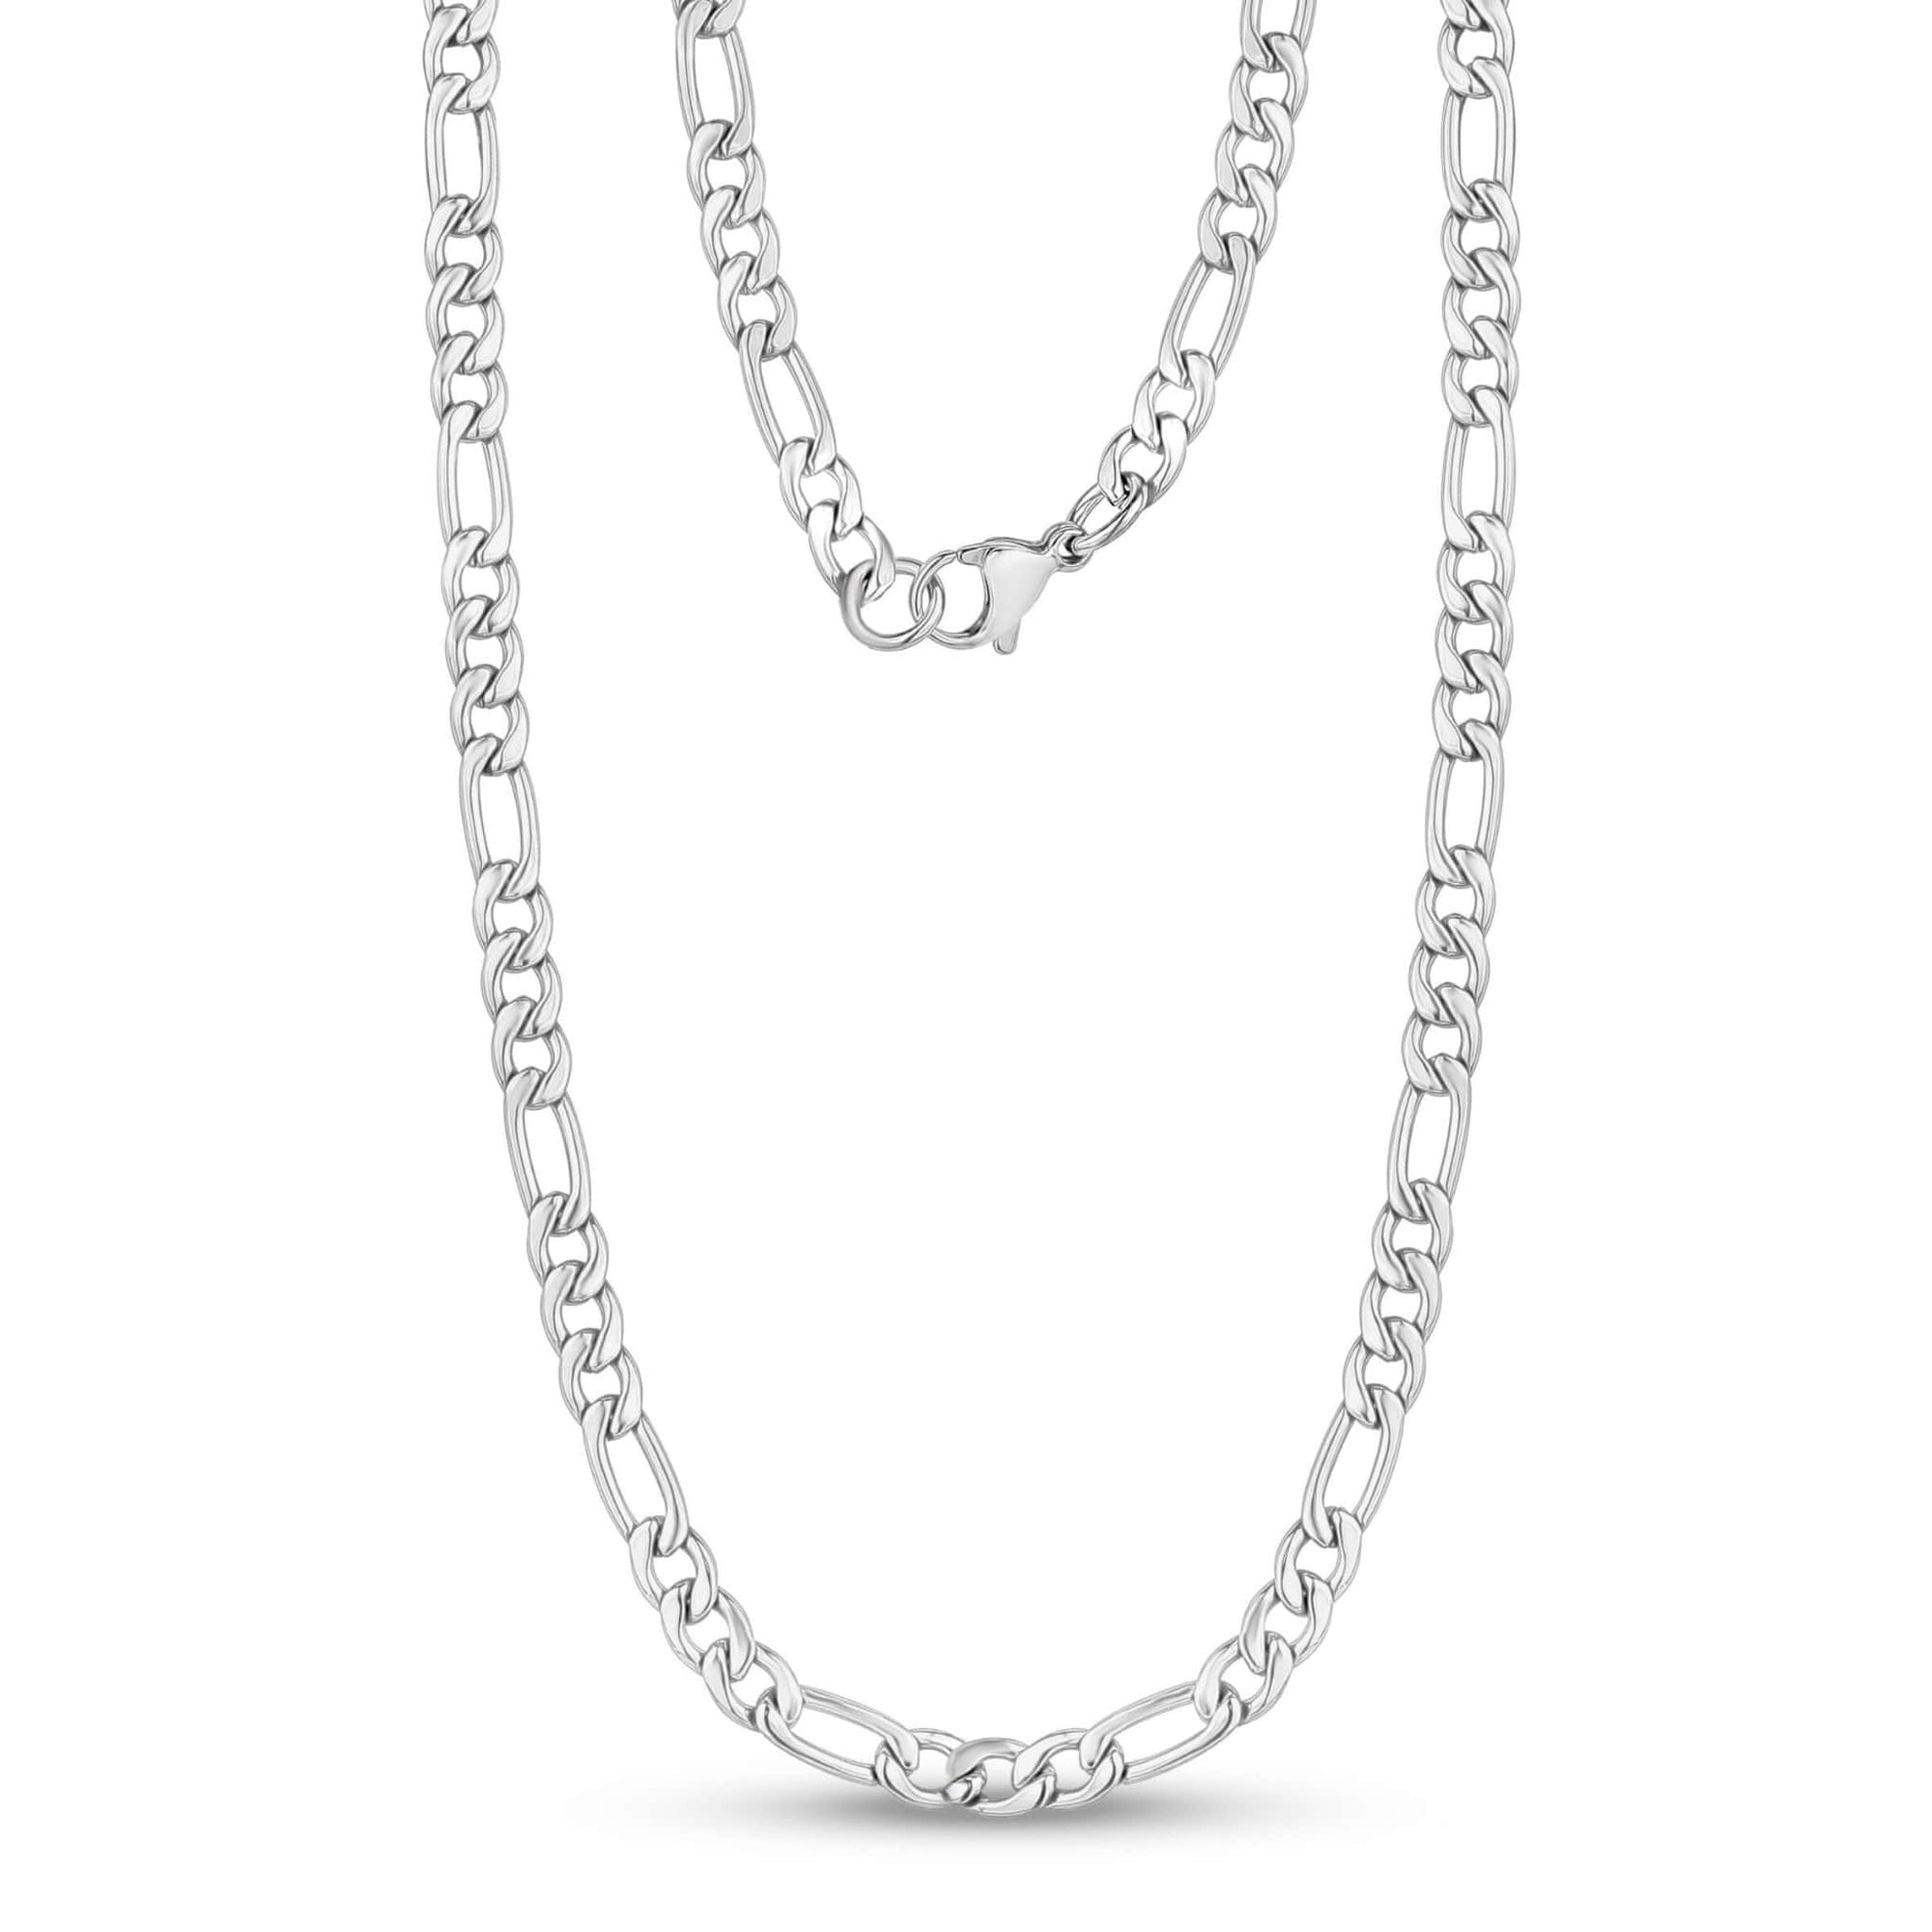 5mm Stainless Steel Figaro Link Chain Necklace at Arman's Jewellers